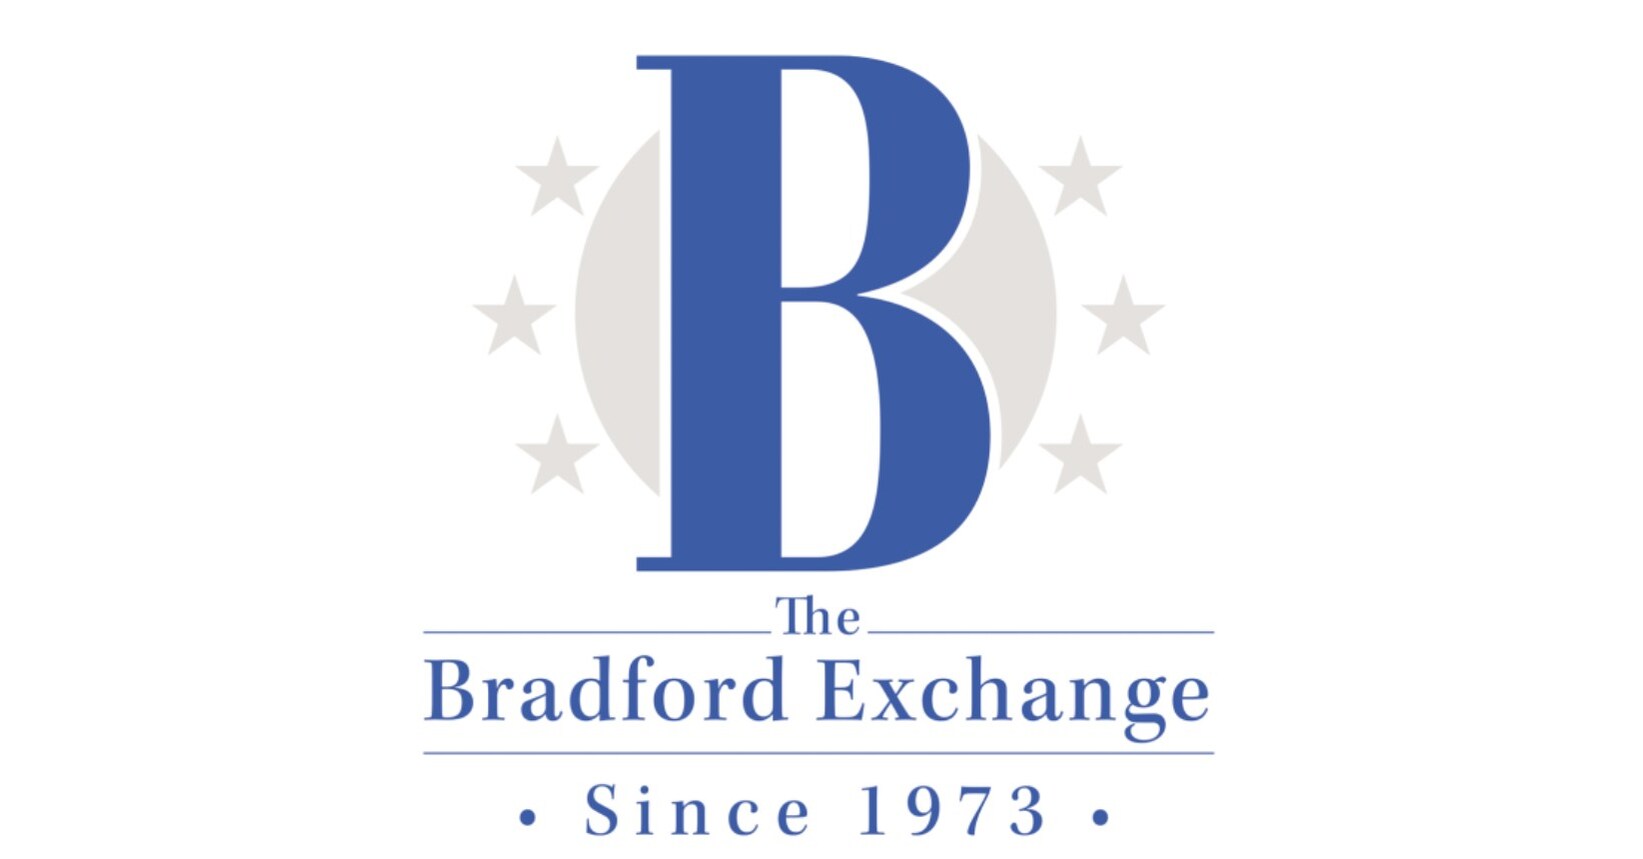 The Bradford Exchange Mint Honors the New Princess of Wales